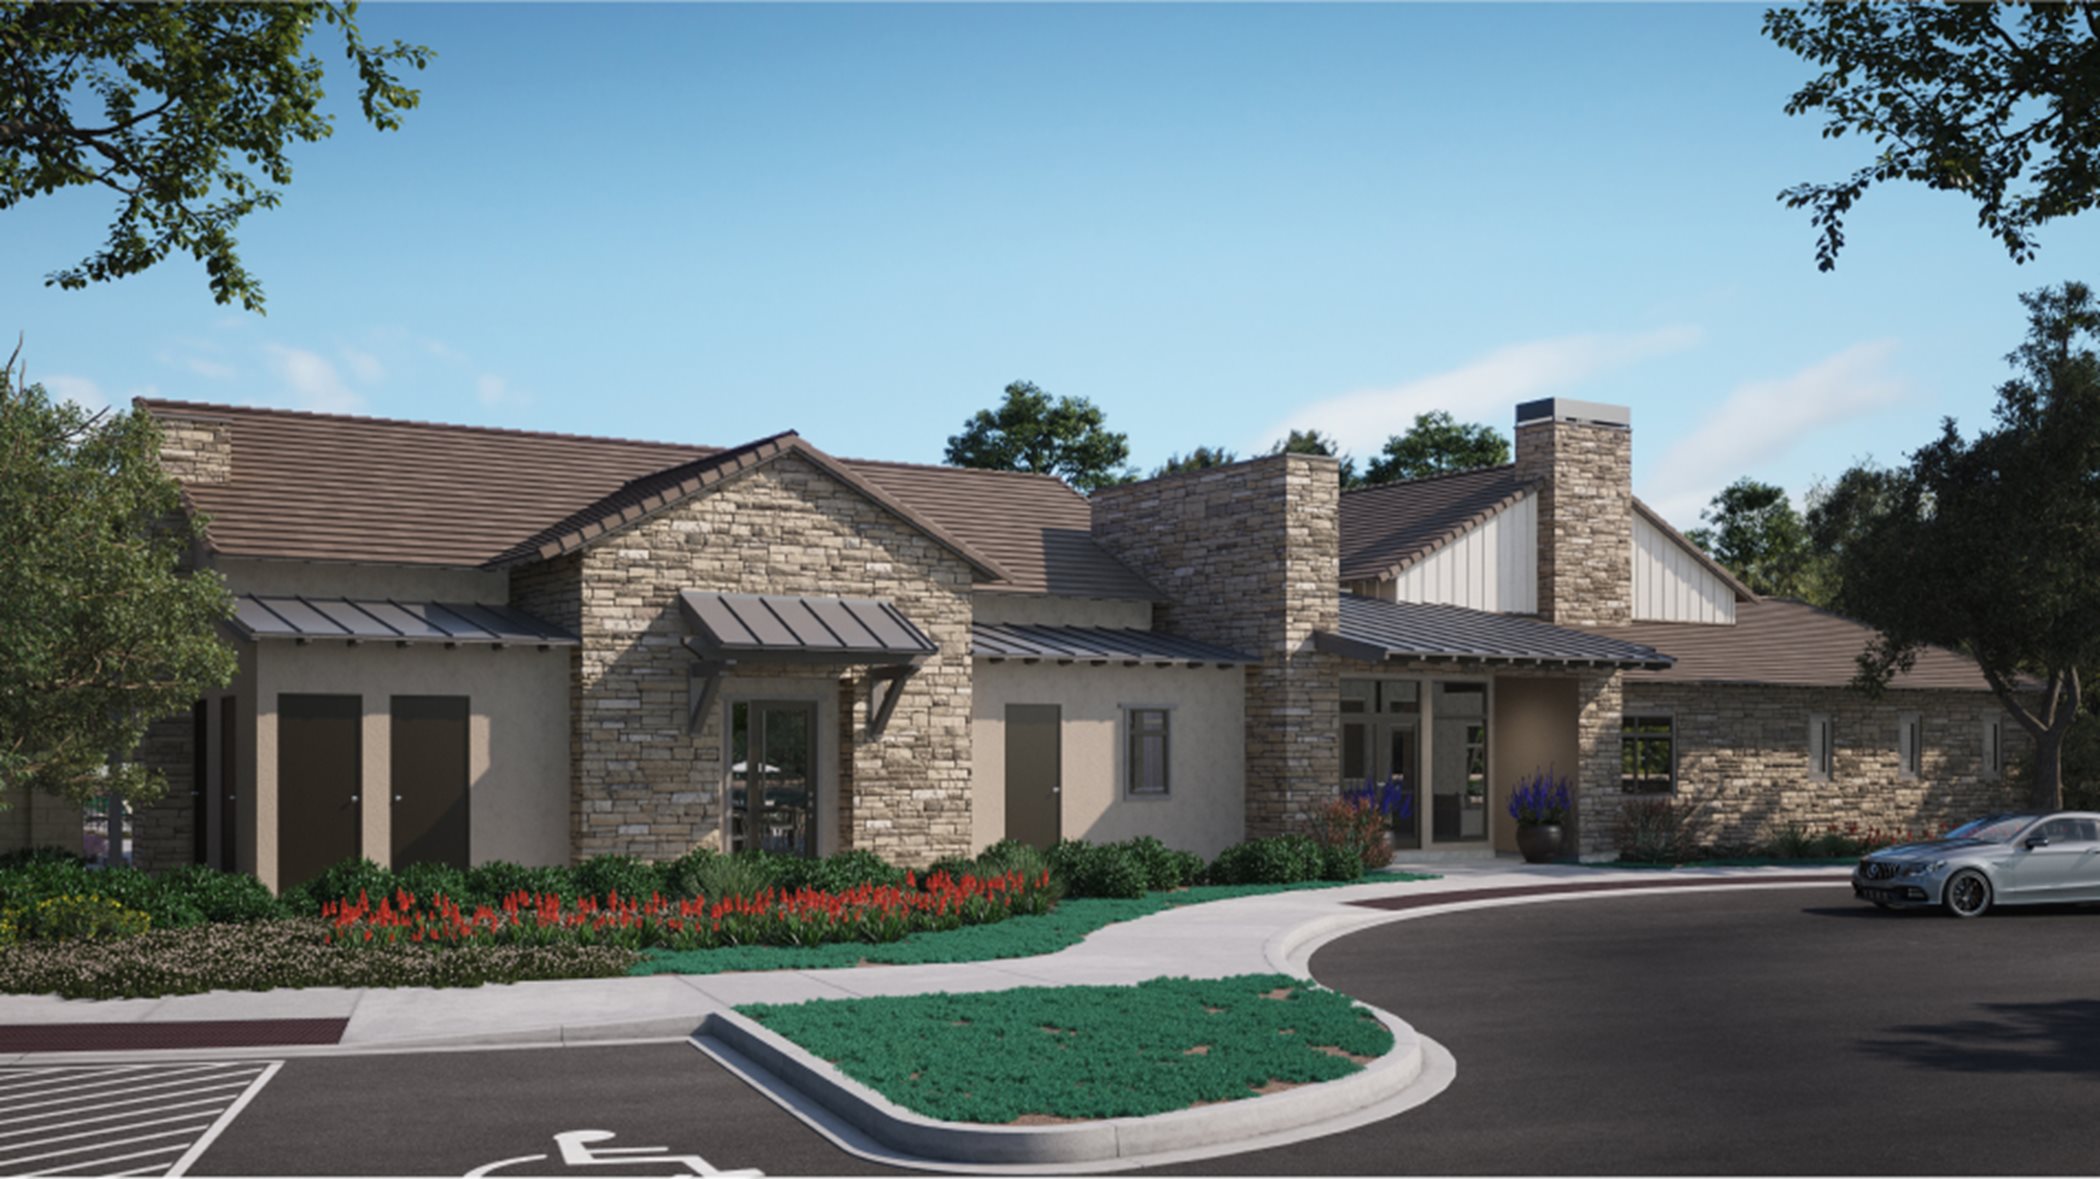 Exterior rendering of the Tesoro Highlands age qualified community center